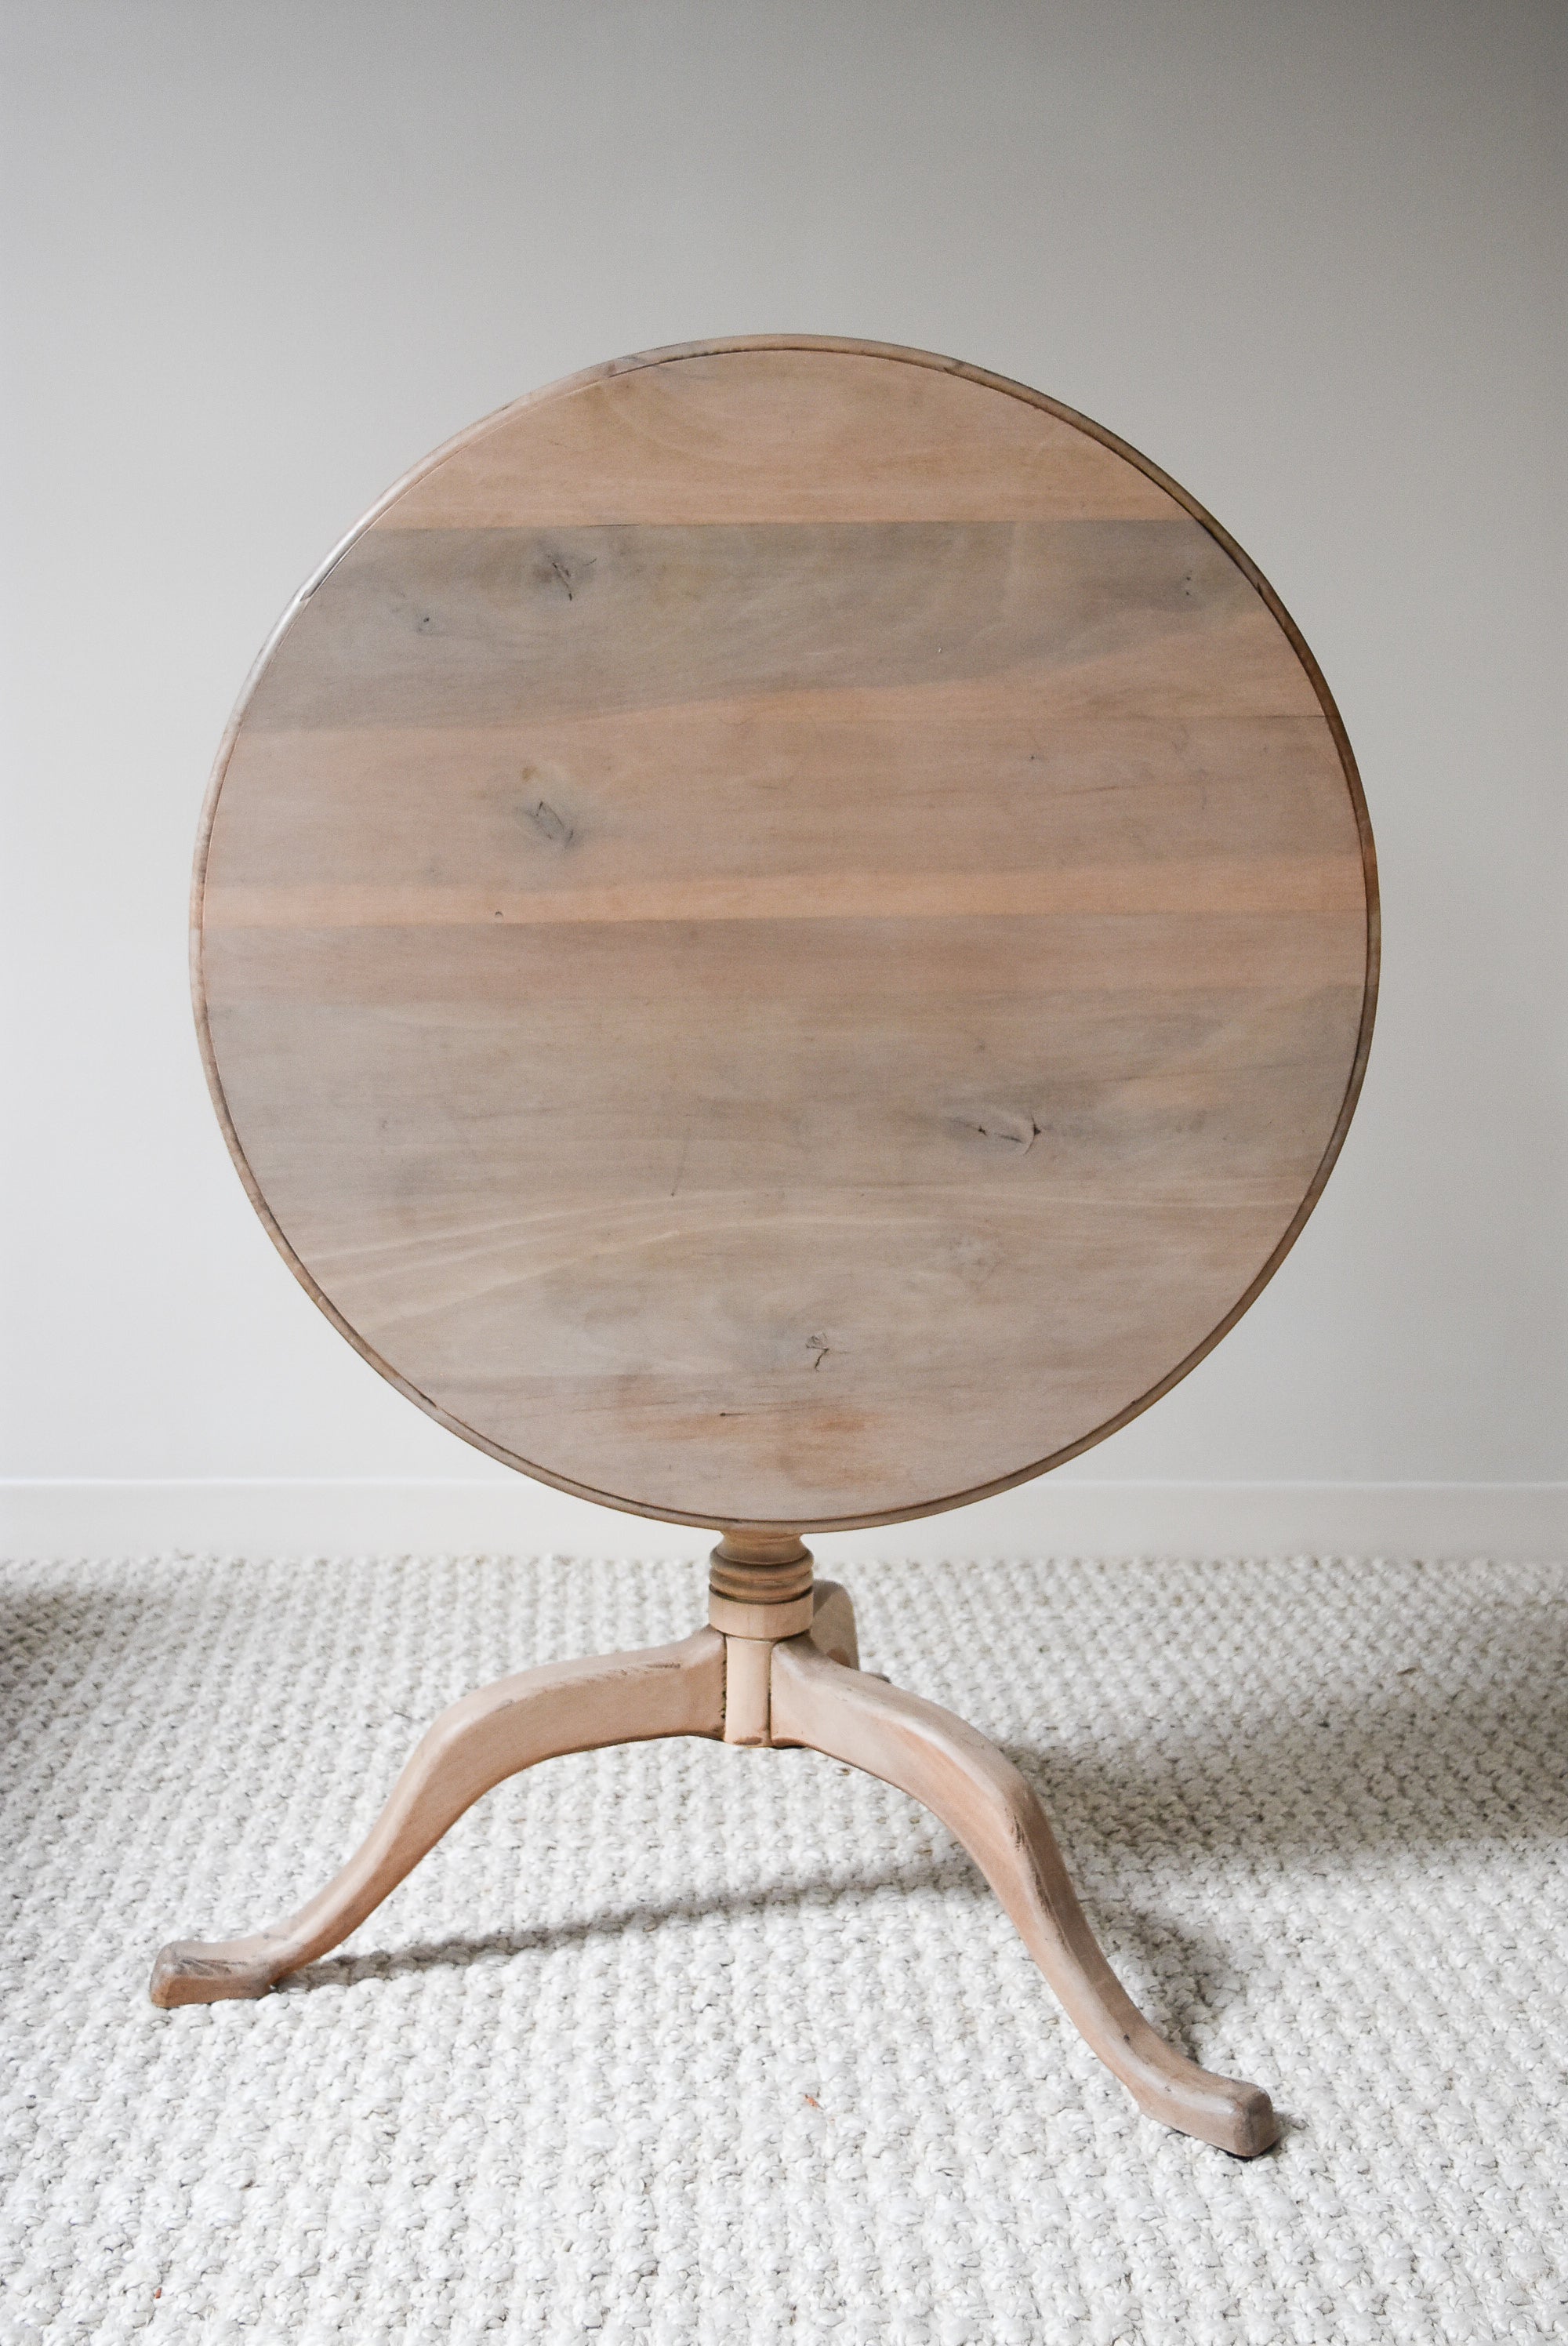 Round Bleached Table with Fold Down Tabletop